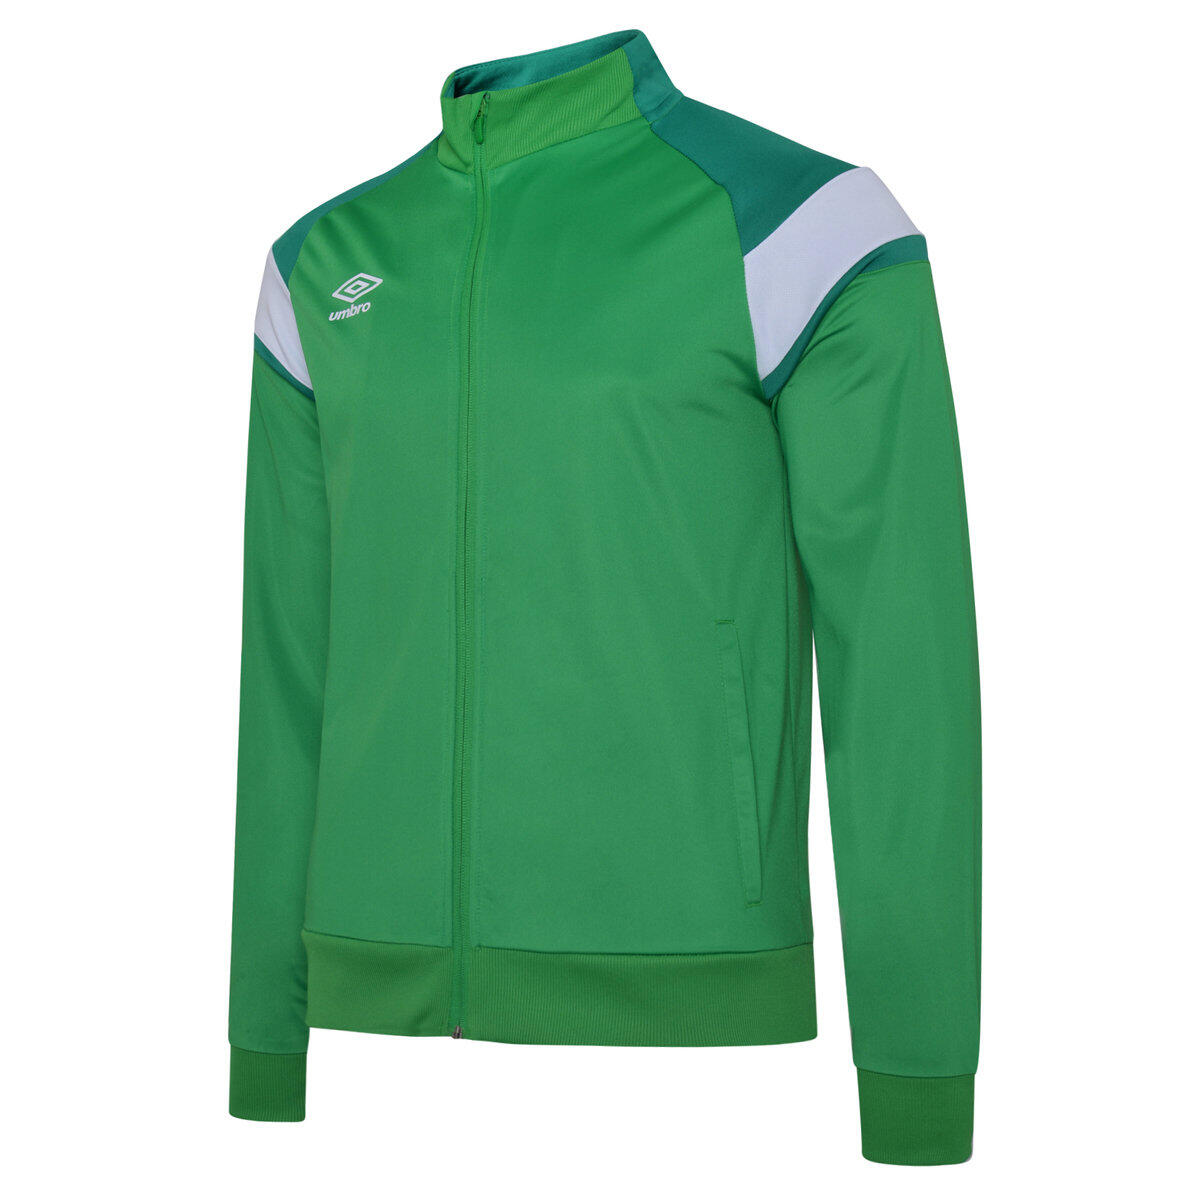 UMBRO Childrens/Kids Knitted Jacket (Emerald/Lush Meadows/Brilliant White)